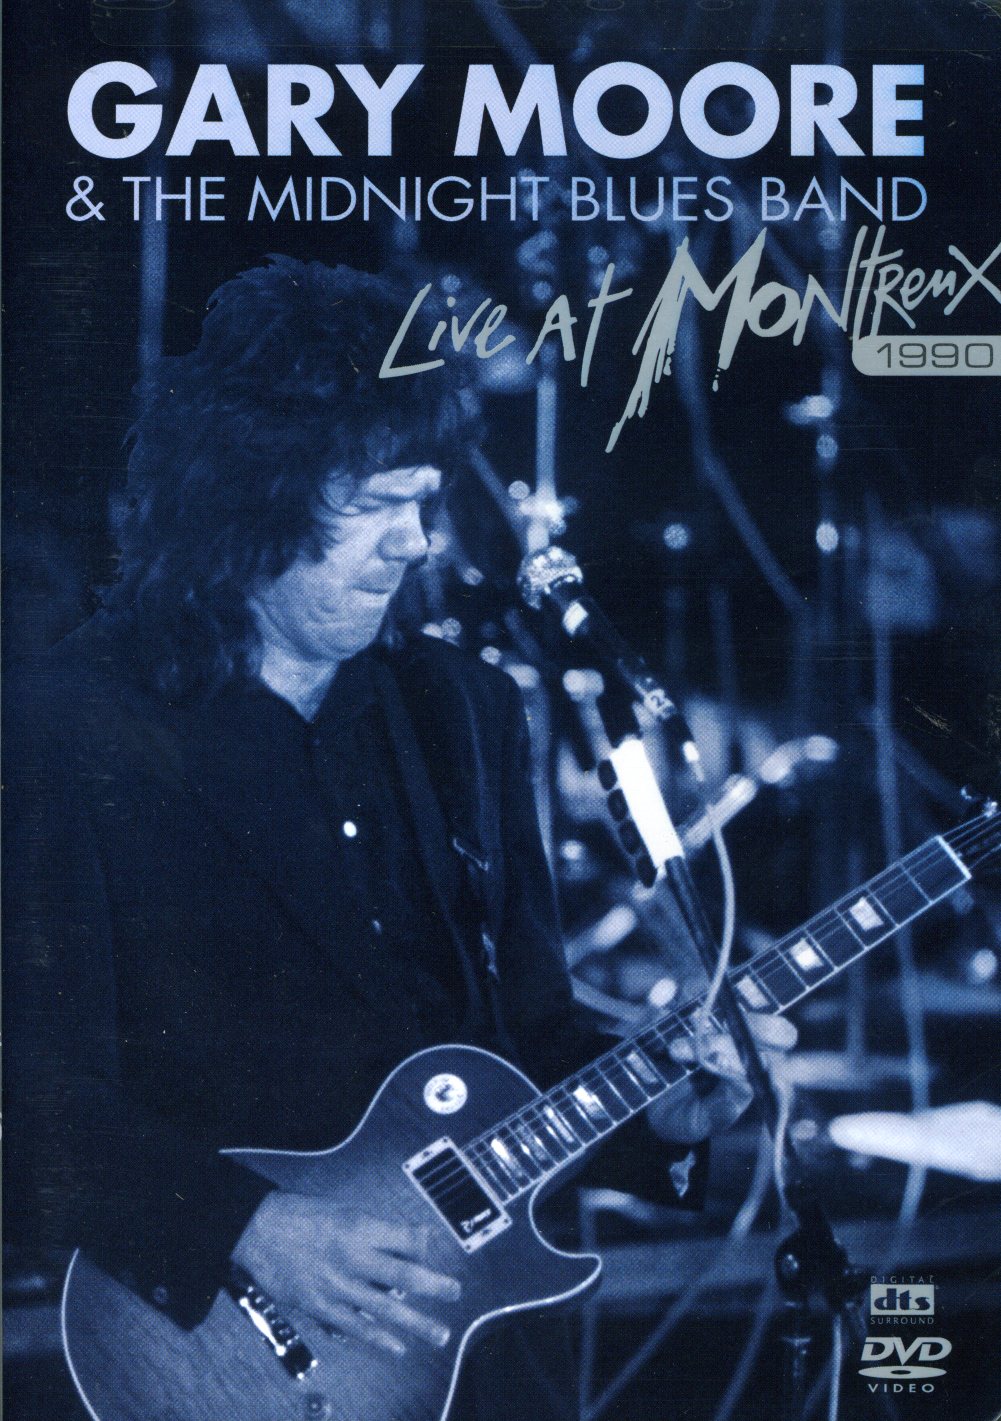 GARY MOORE: LIVE AT MONTREUX 1990 [+1997] / (DTS)